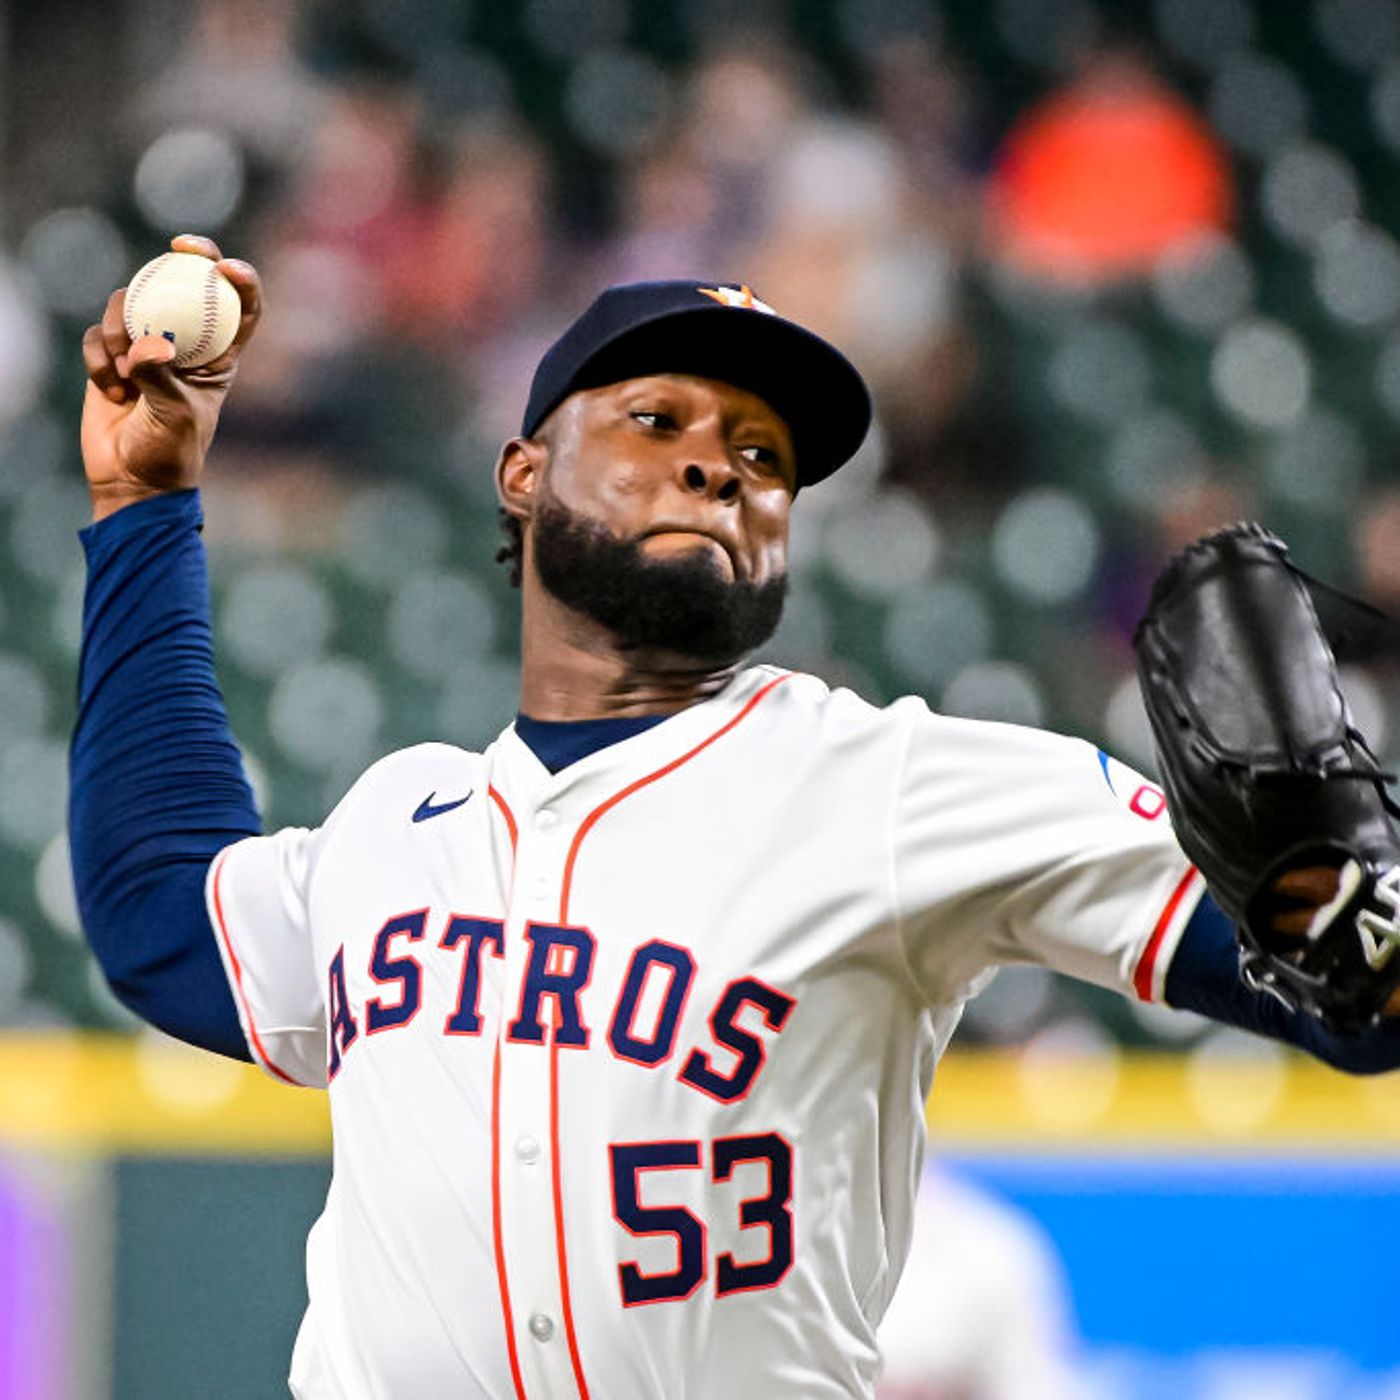 Javier And Urquidy Out, Astros Look To Sweep Cards, Texans Stefon Diggs' Expectations